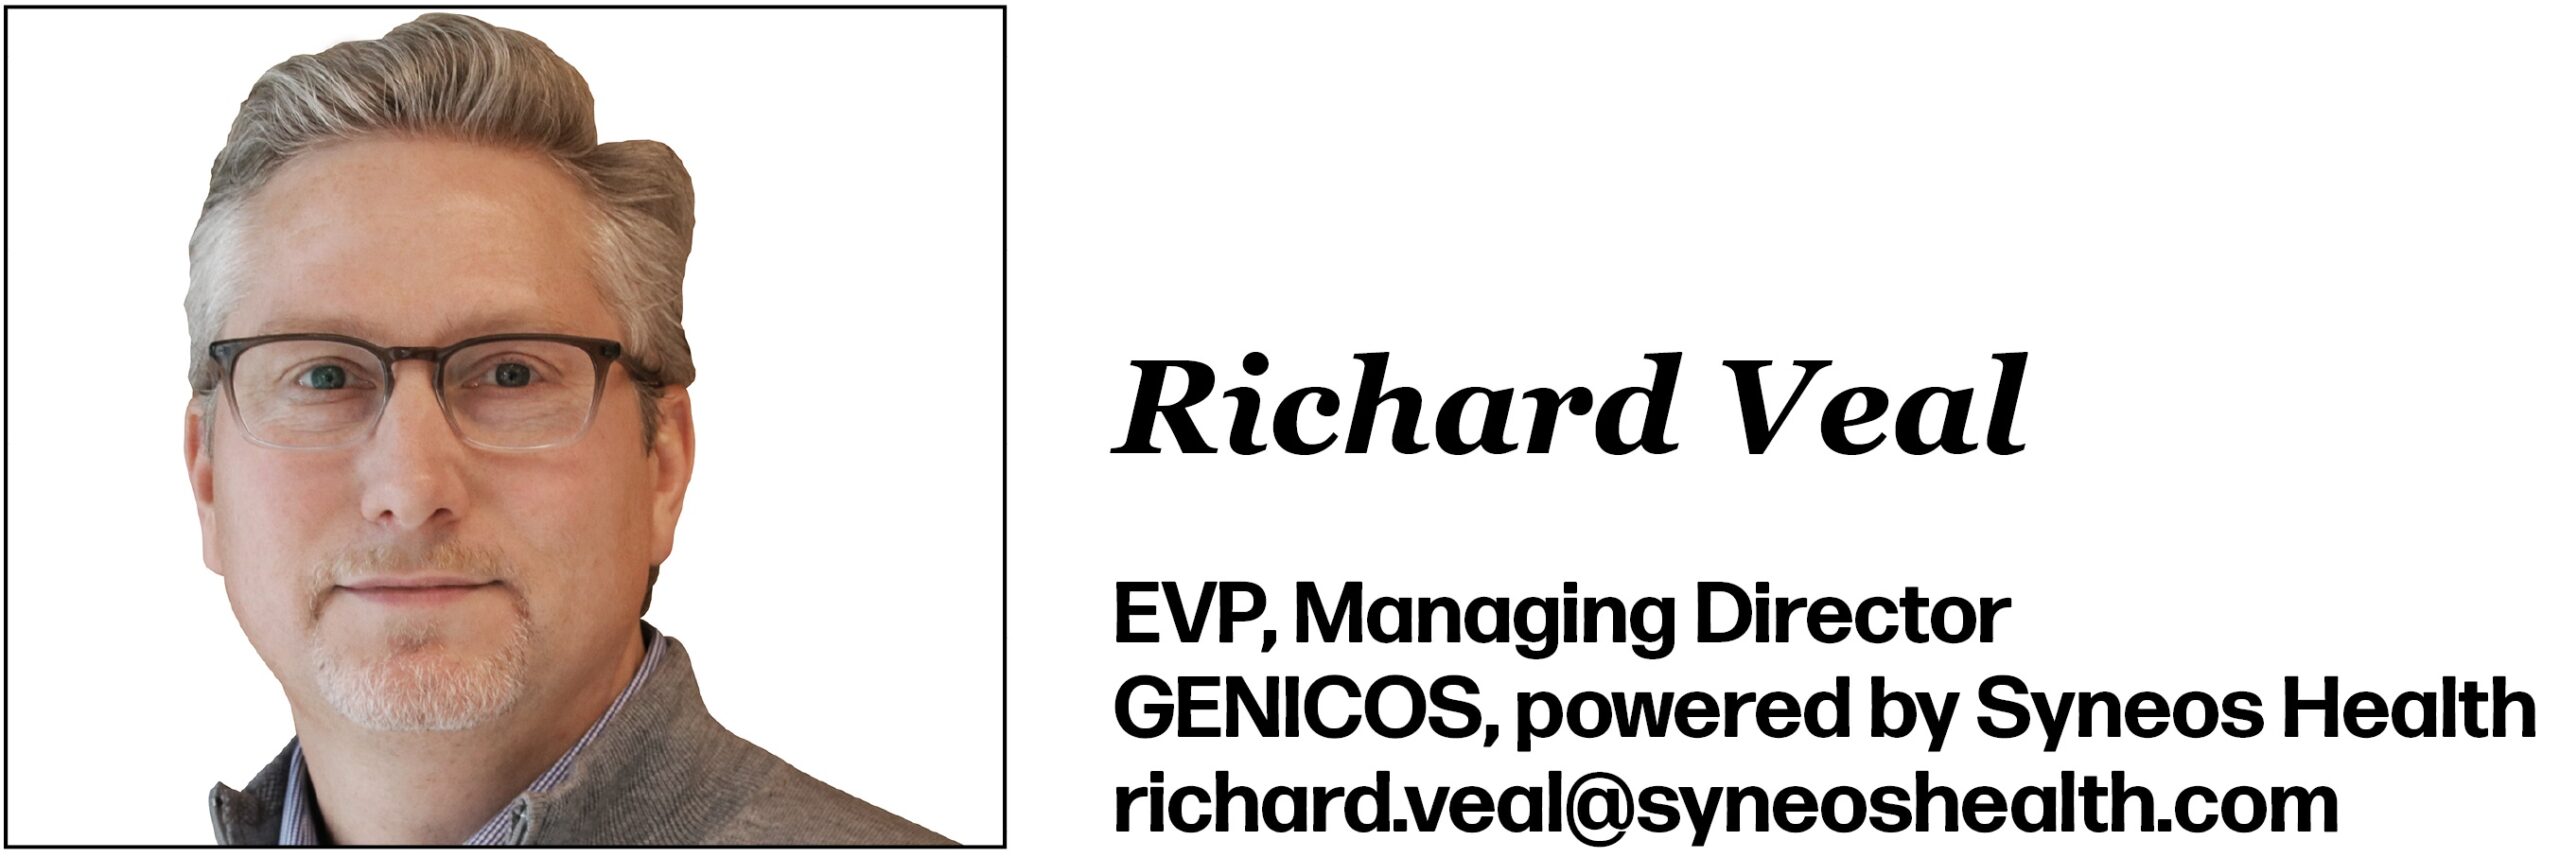 Richard Veal EVP, Managing Director GENICOS, powered by Syneos Health richard.veal@syneoshealth.com 